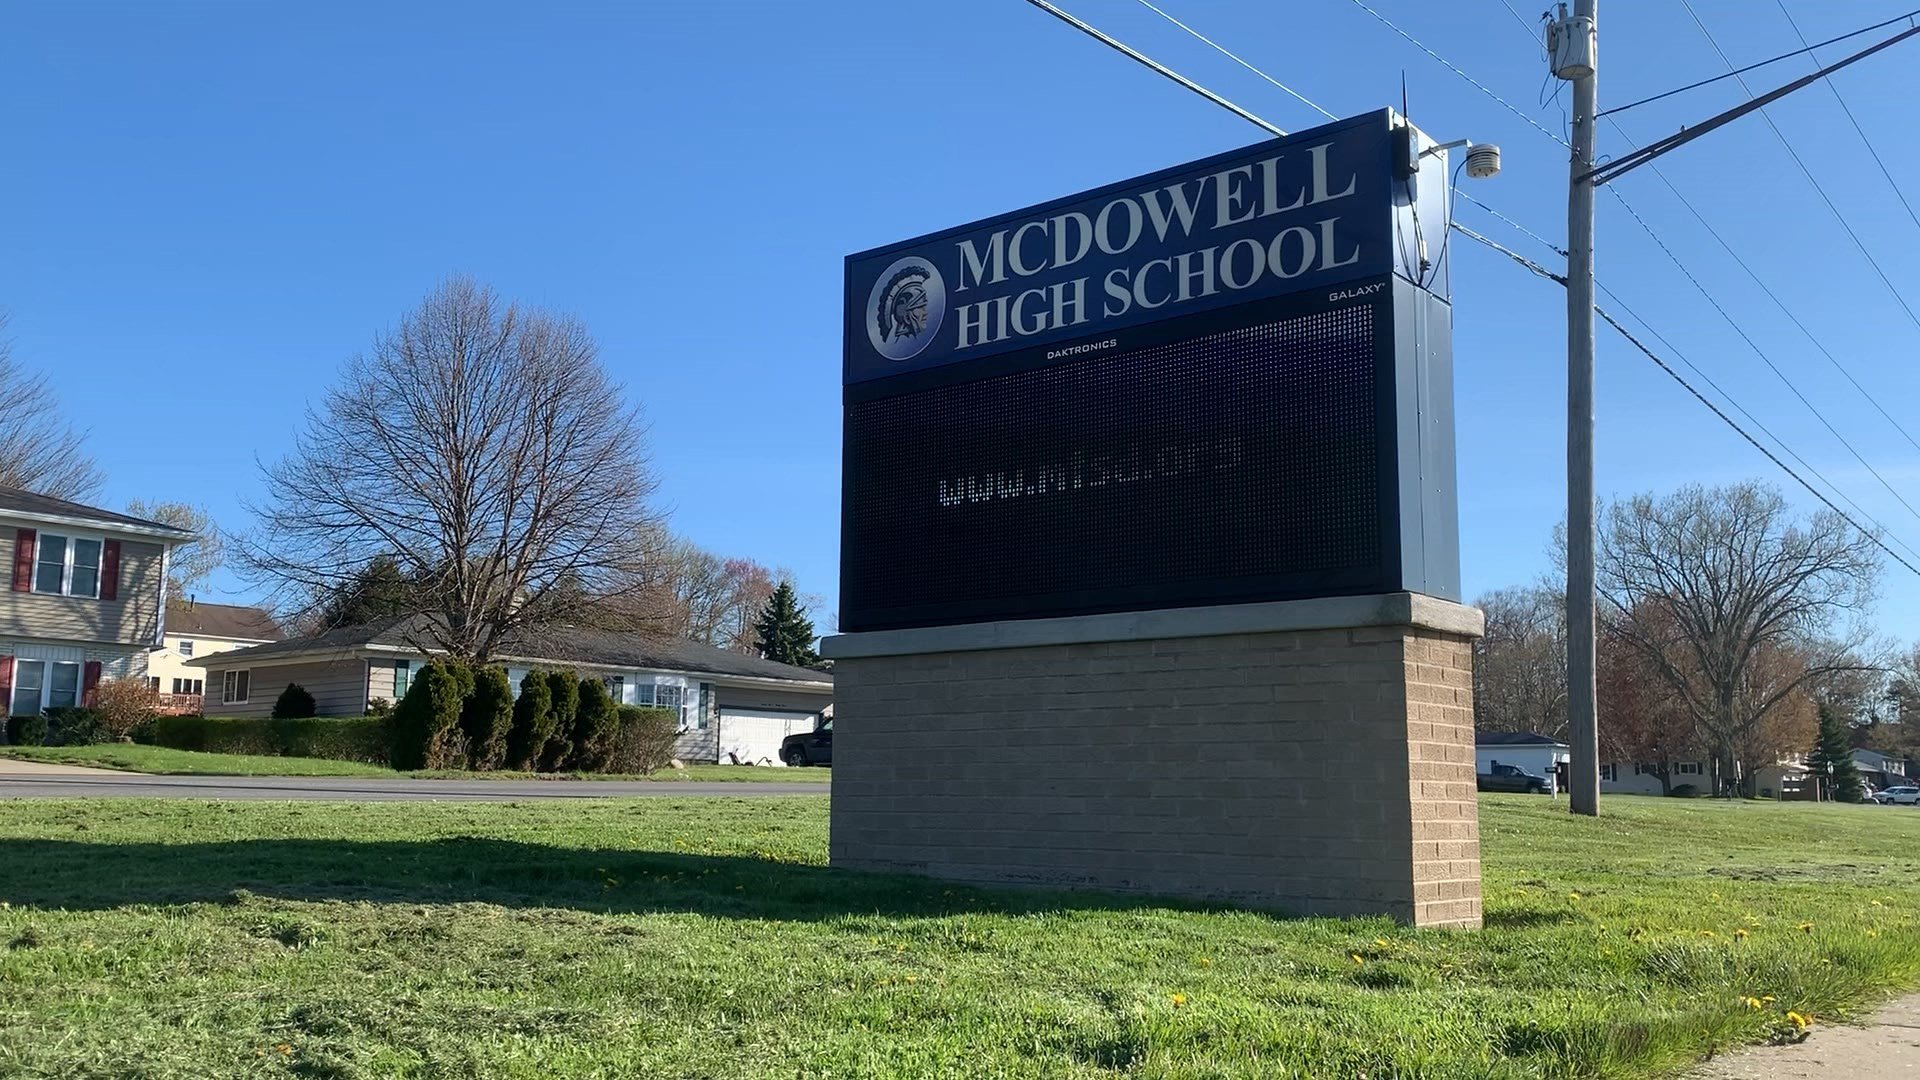 Virtual Learning Could be in the Future for Millcreek Schools if Covid-19 Cases Rise